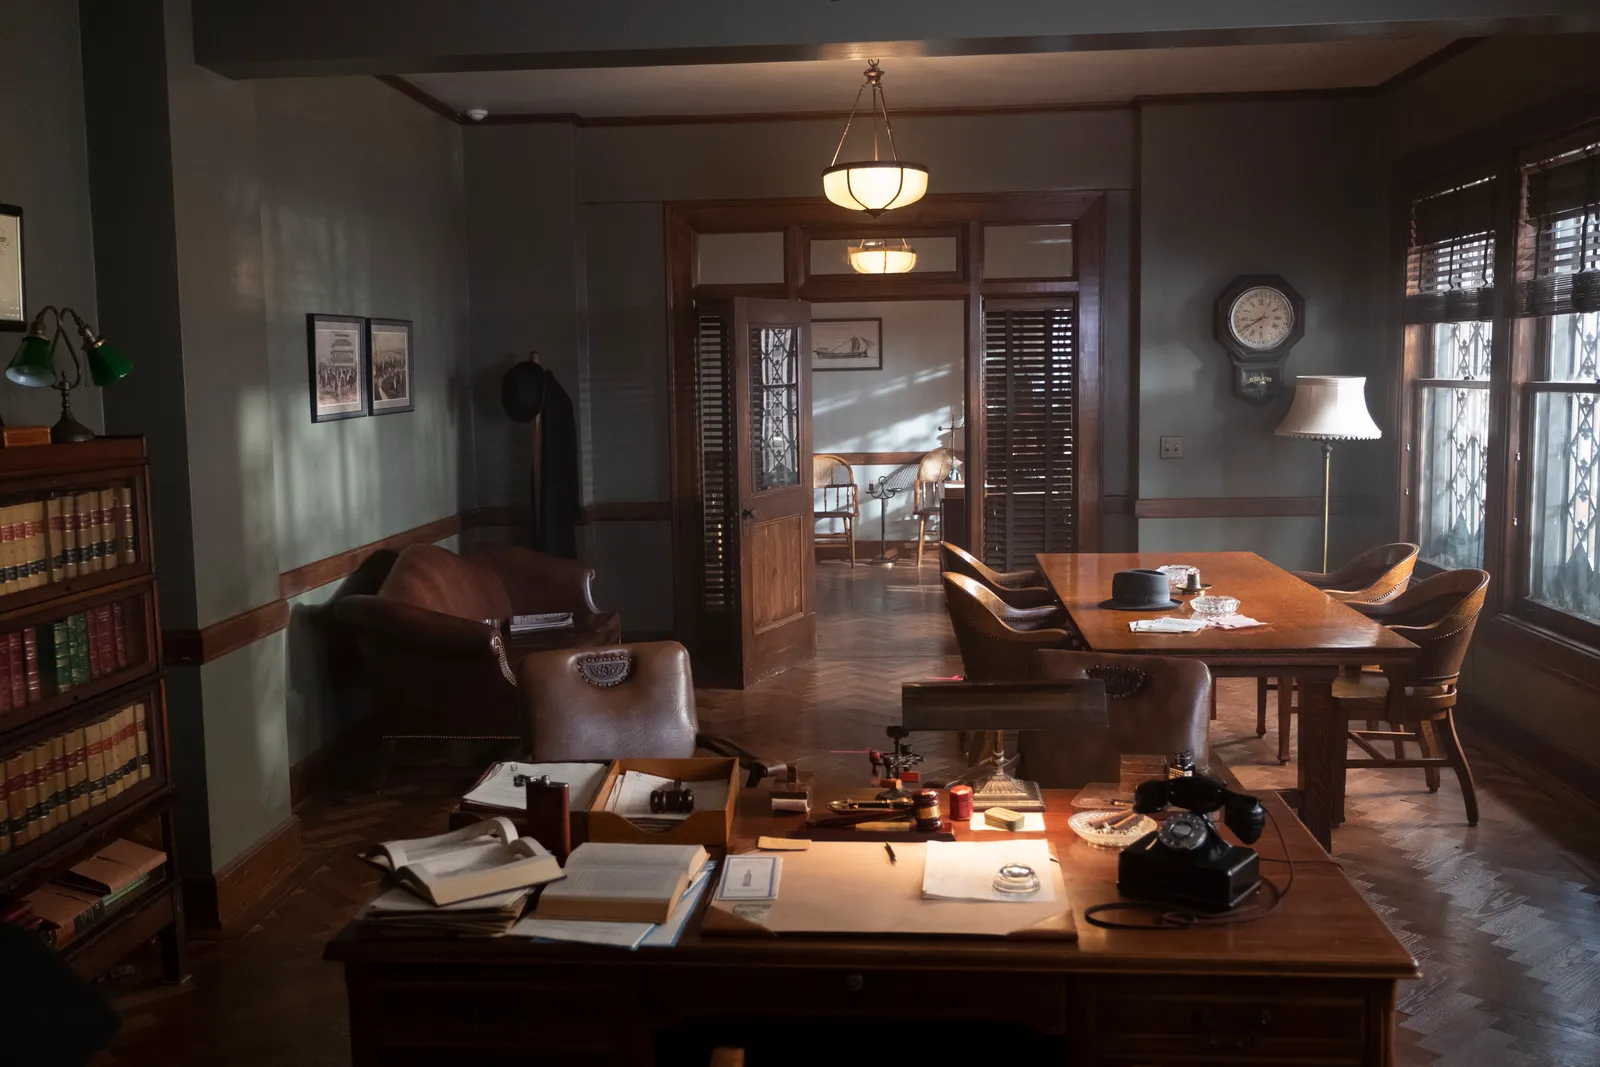 Attorney E.B. Jonathan’s office featured a bronze window grille, which connotes a feeling the character is trapped in a prison. Photo: Merrick Morton/HBO